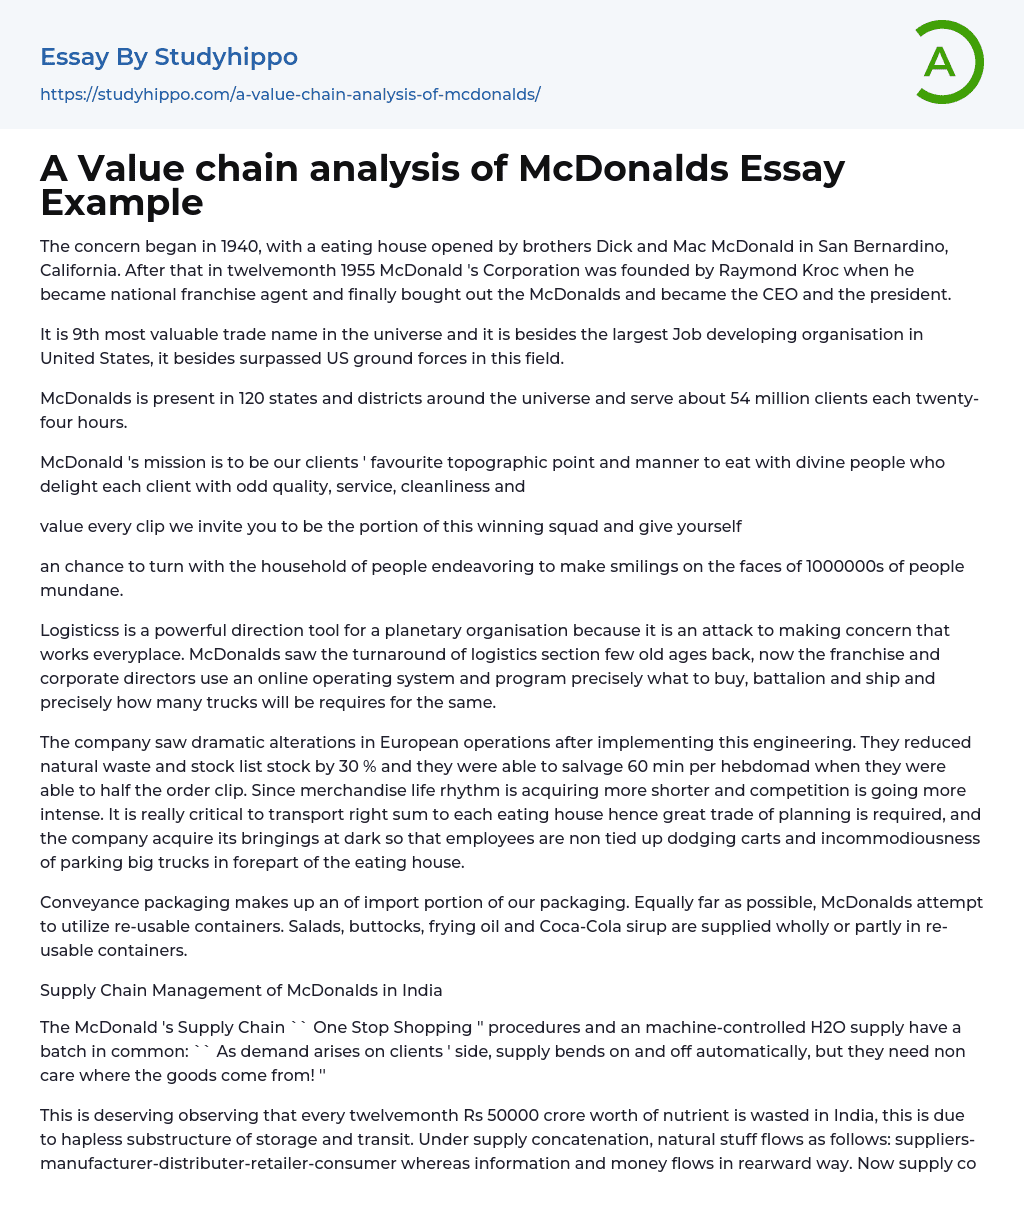 A Value chain analysis of McDonalds Essay Example